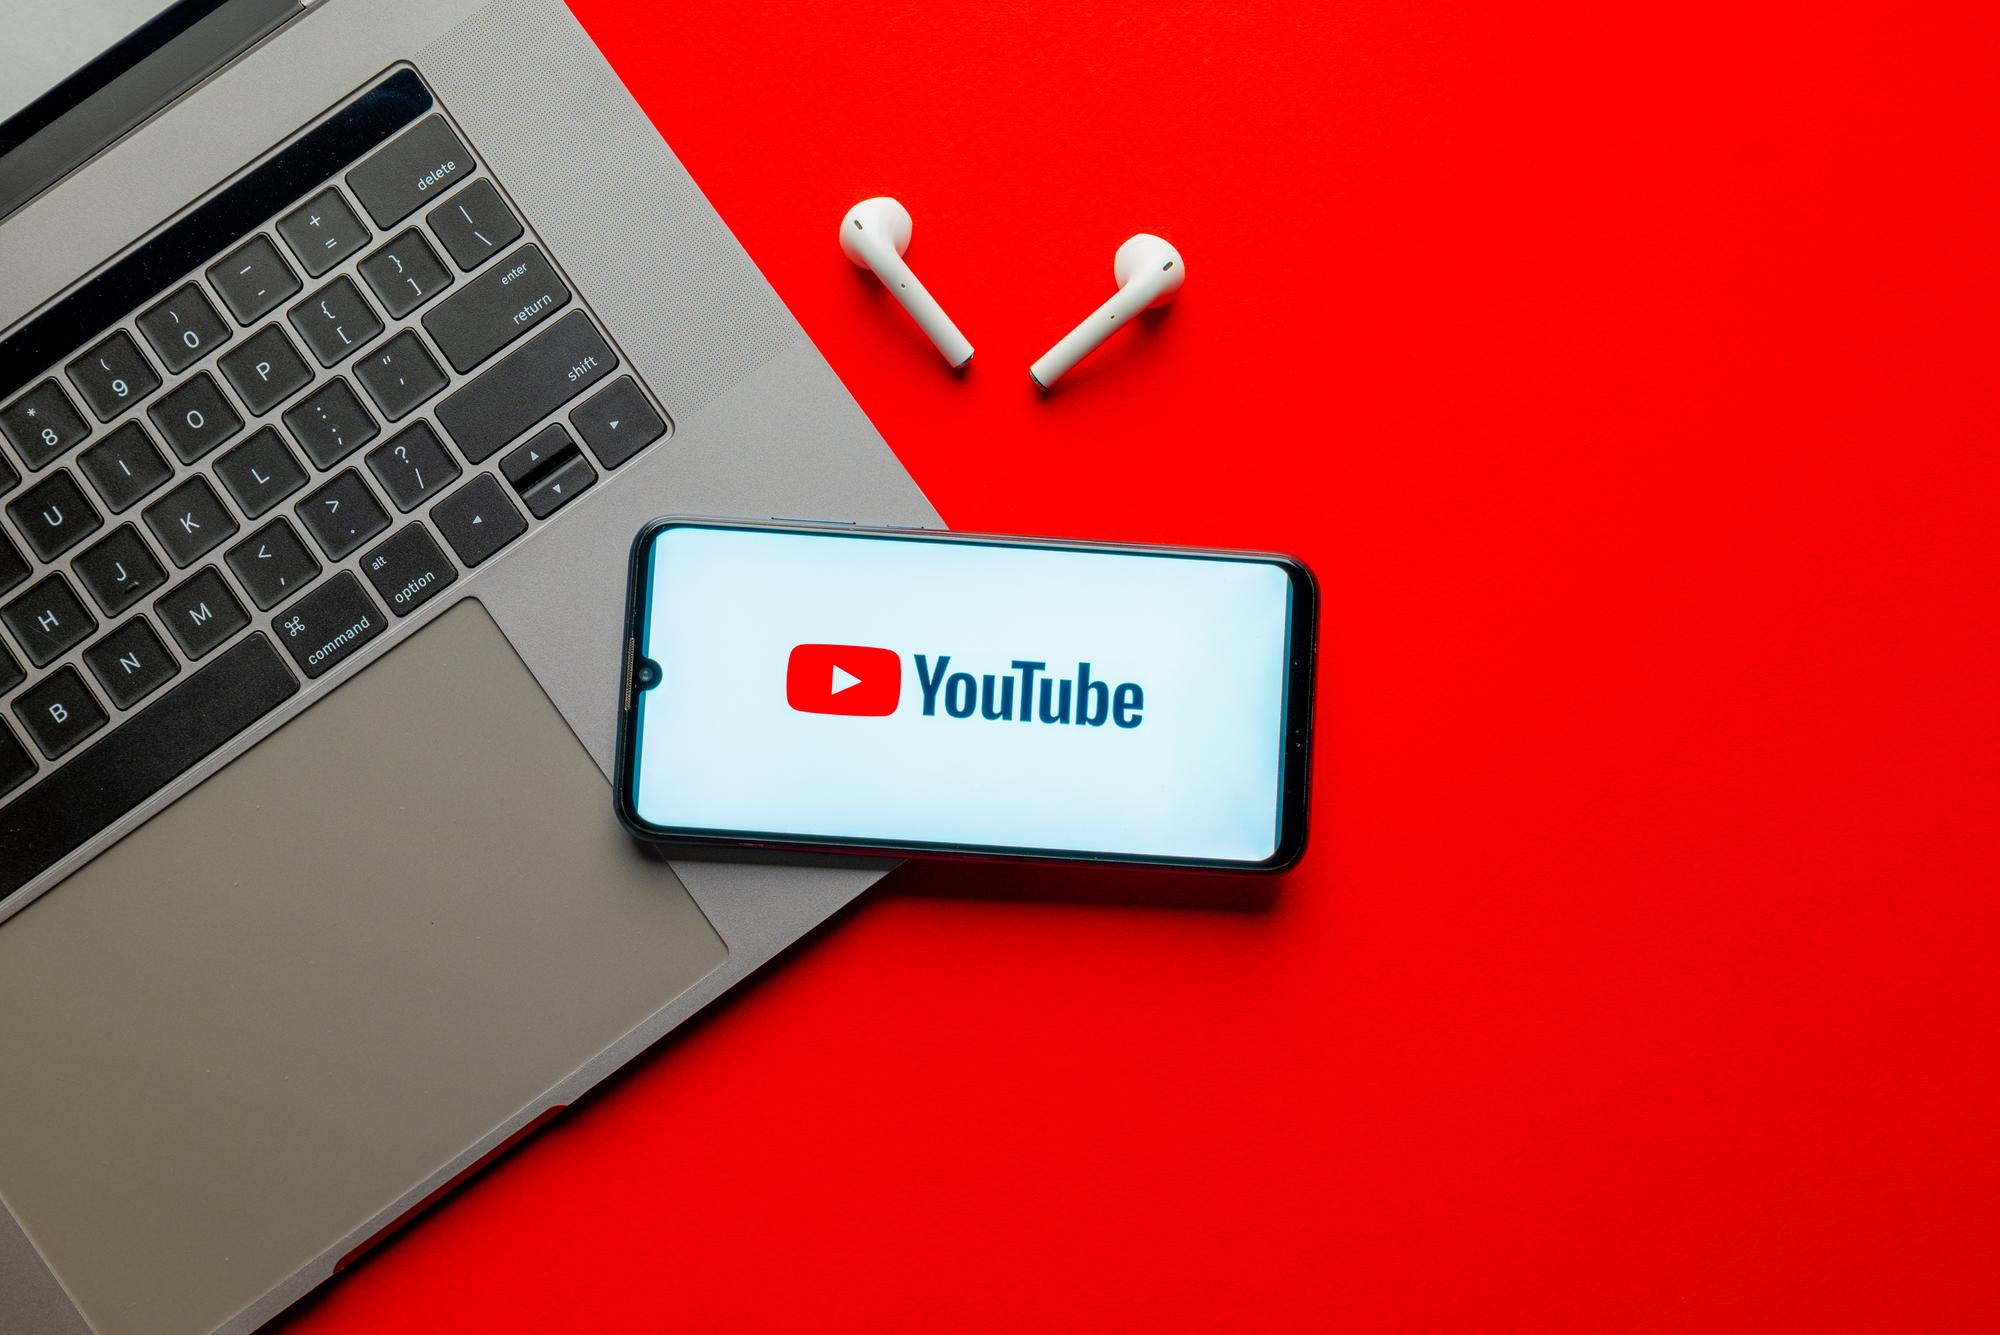 Key Strategies To Optimize Your Videos For YouTube Search Results